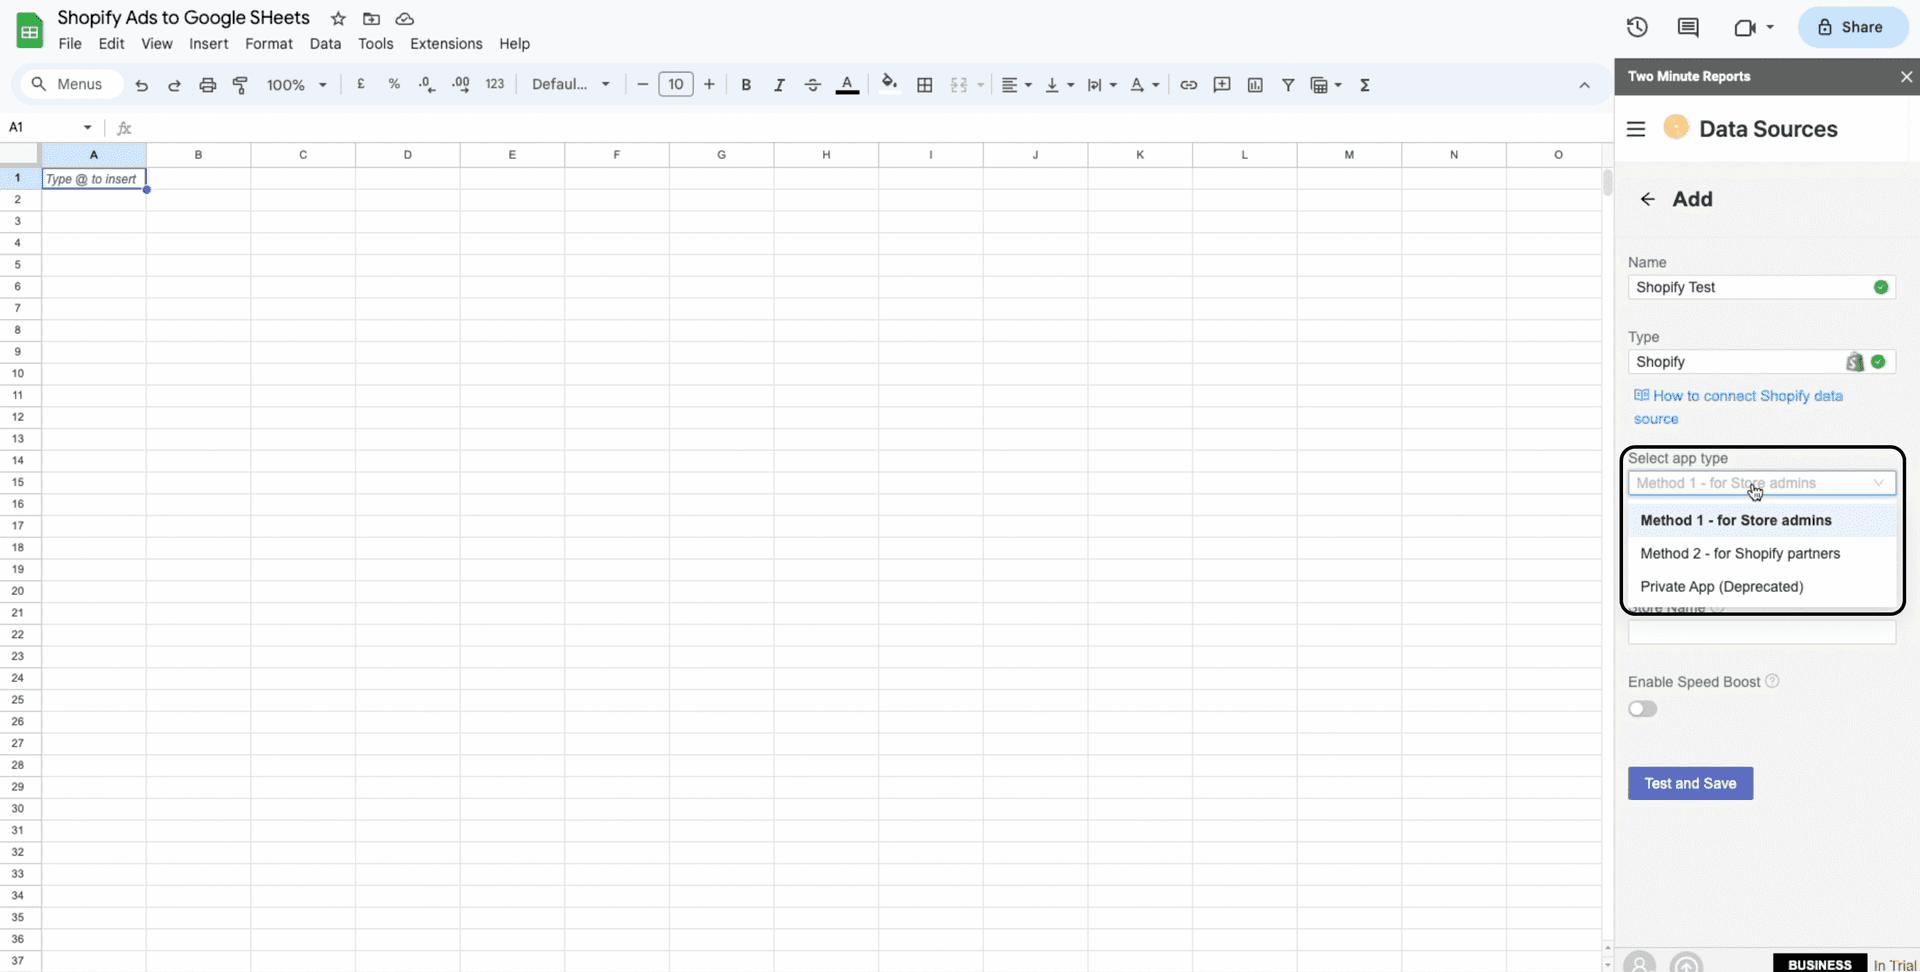 shopify to google sheets app type